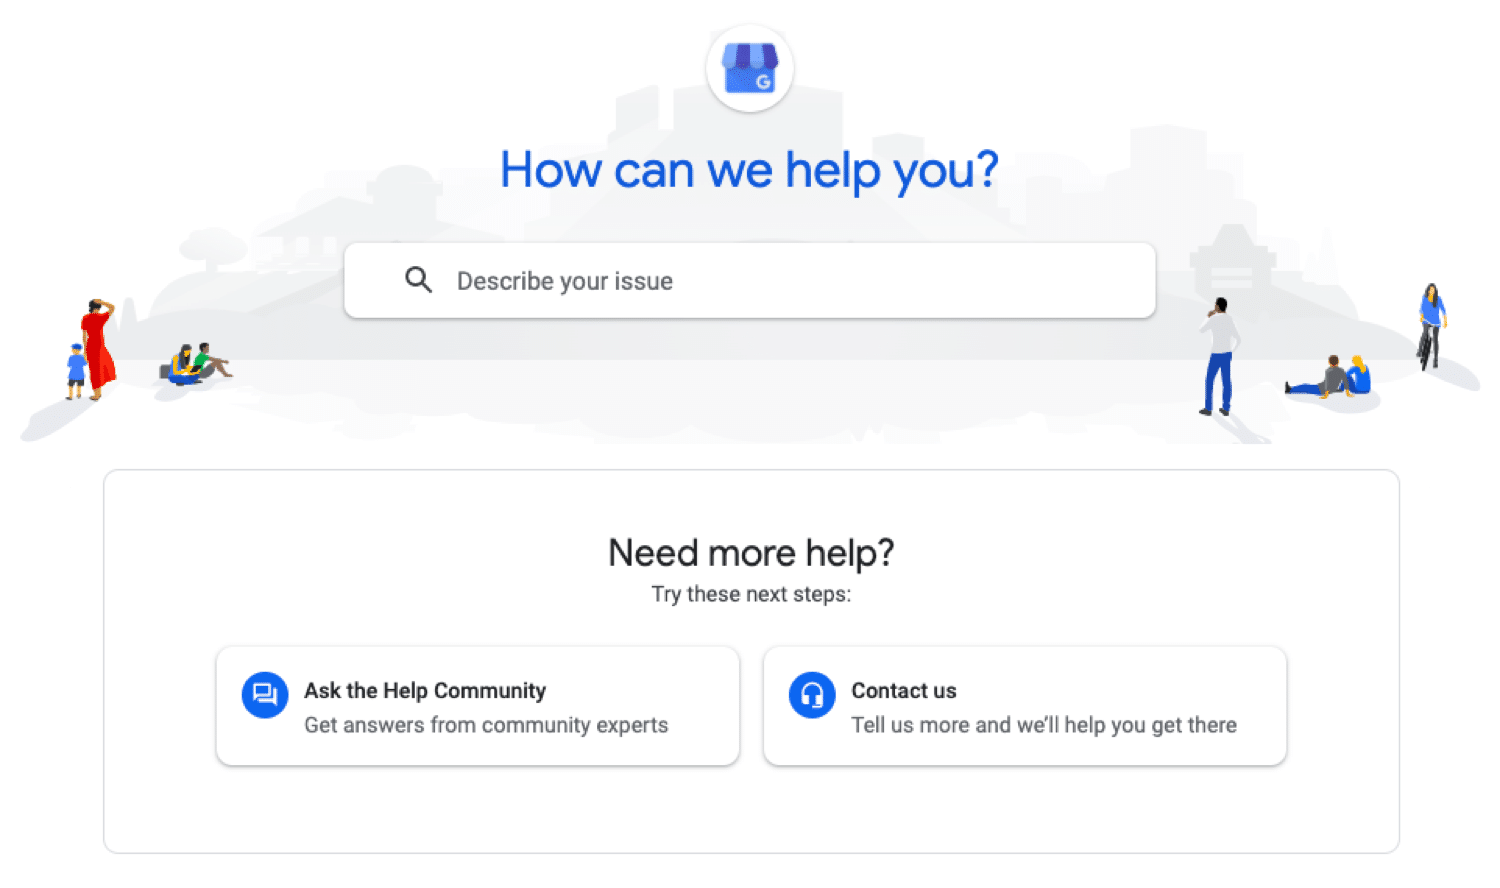 Google My Business support portal for accessing the knowledge base, community and direct support